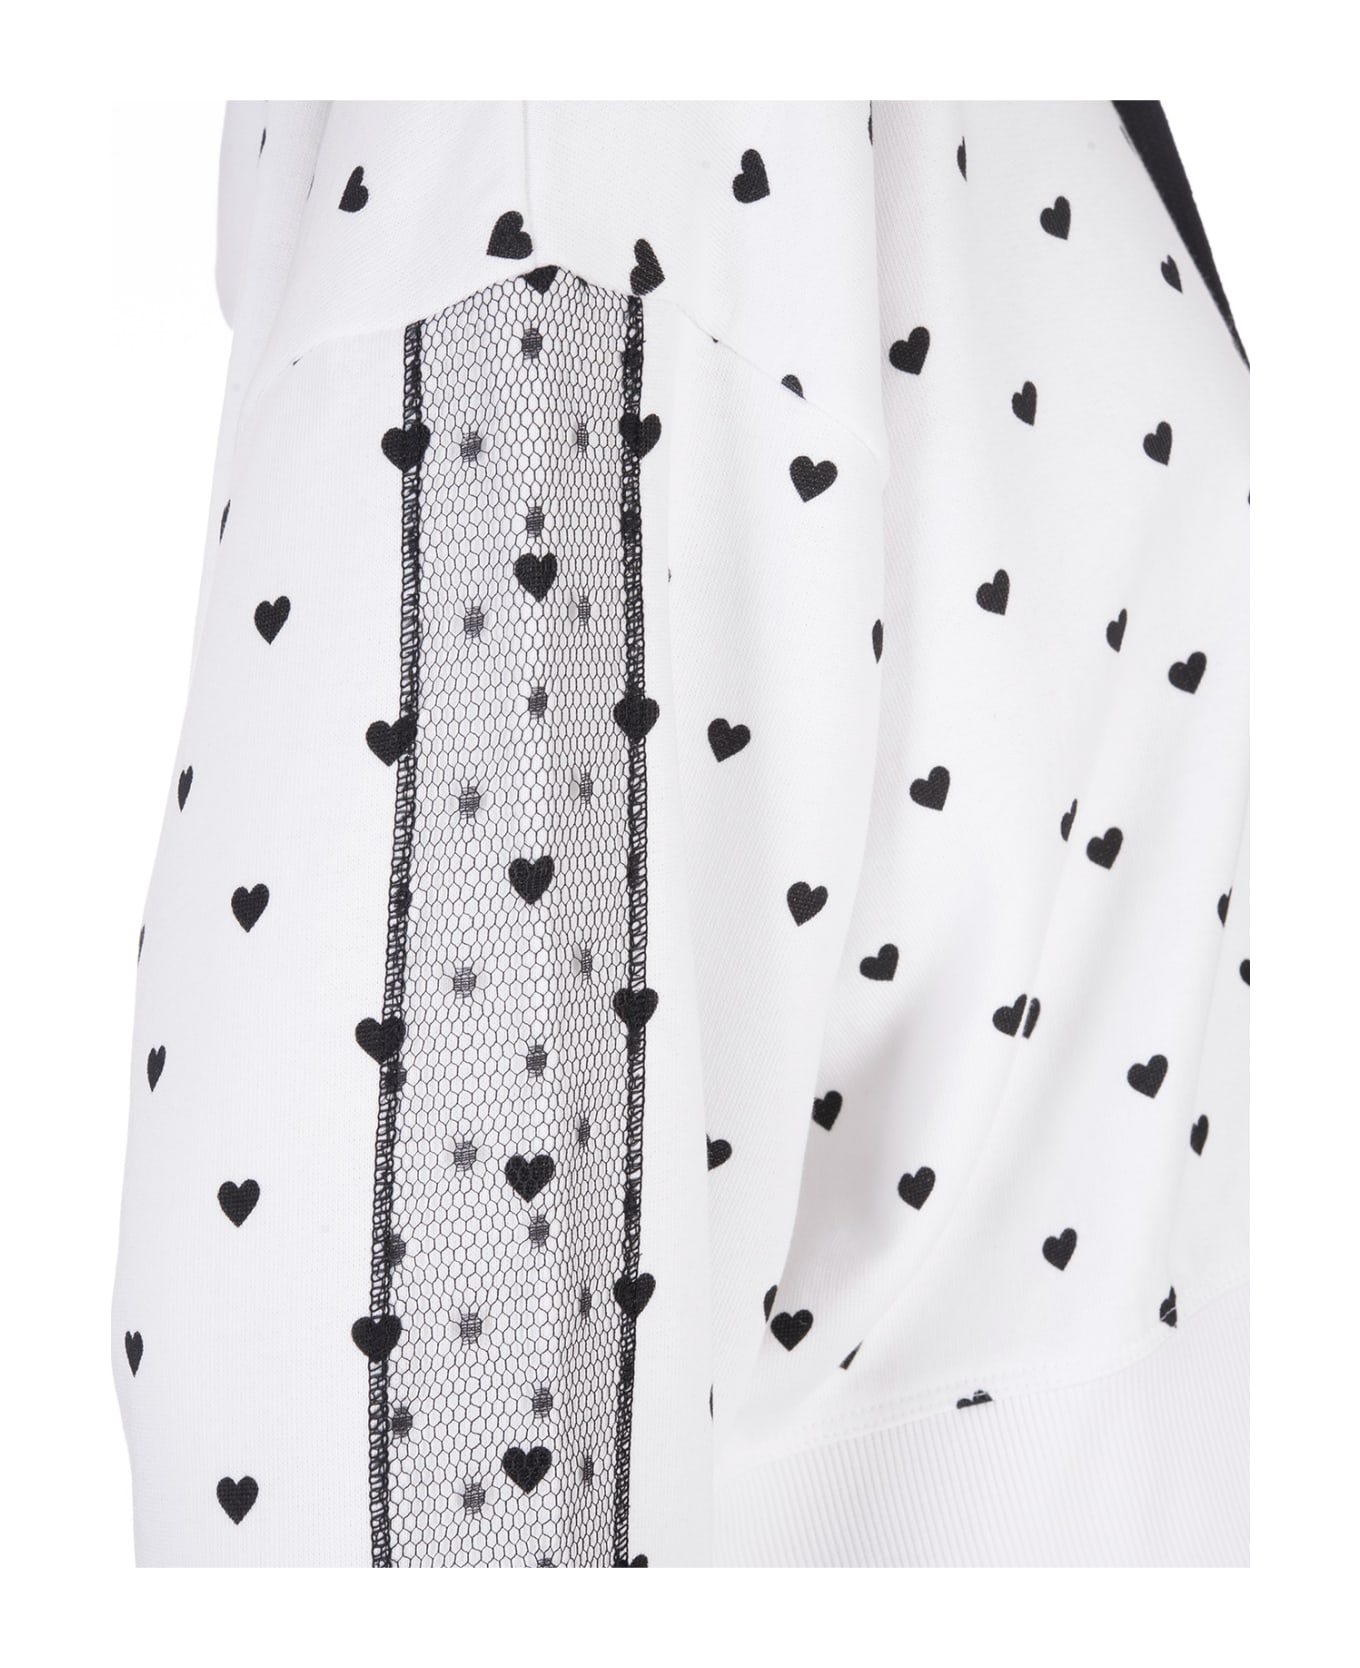 RED Valentino cropped White Hoodie With Hearts Pattern - Bianco